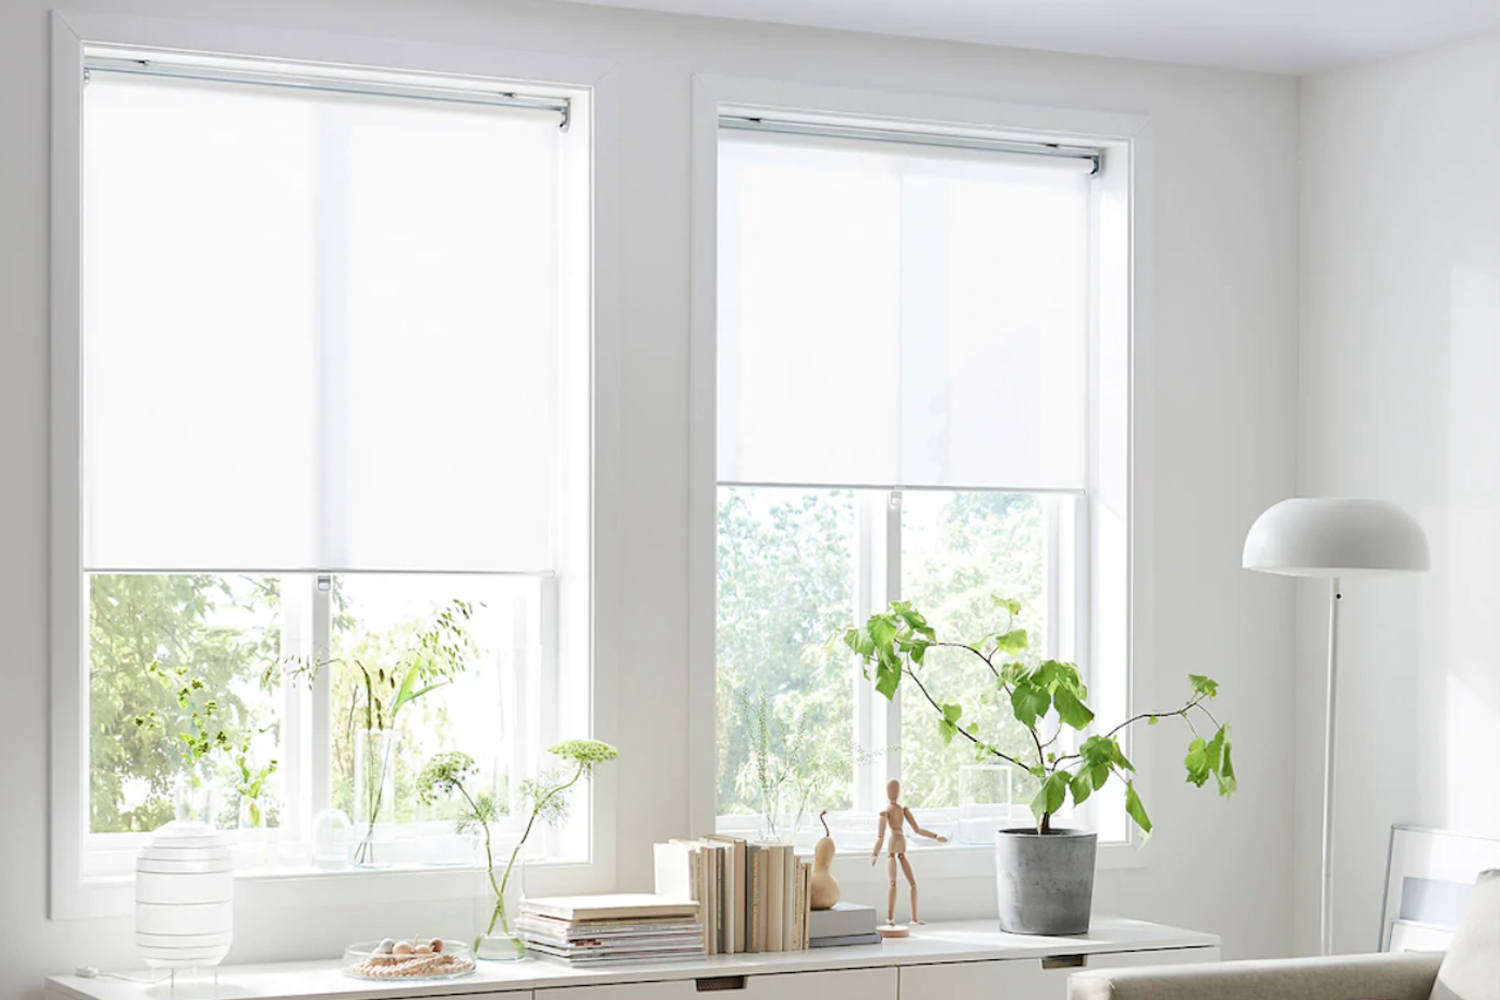 Our Brand Ox Mia Light Filtering Roller Shade